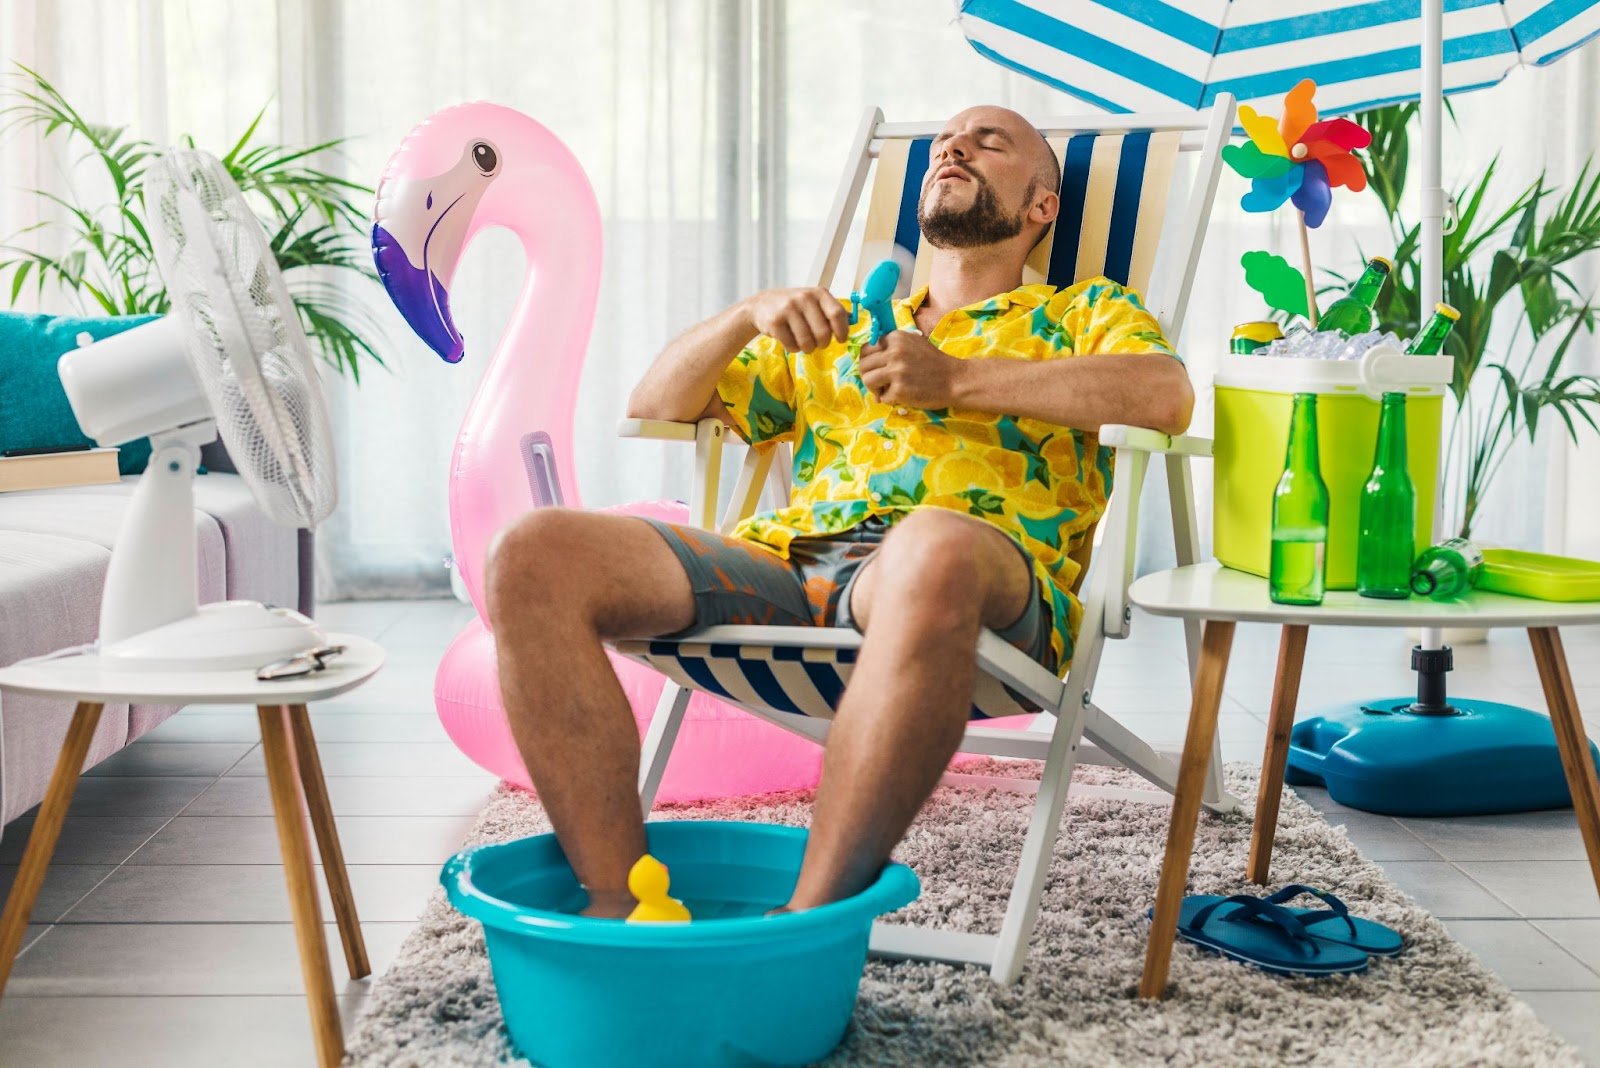 A man is relaxing in a holiday scene in his home. He is sitting in a deck chair. Relaxation and lowering stress levels is key to improving your sperm count.